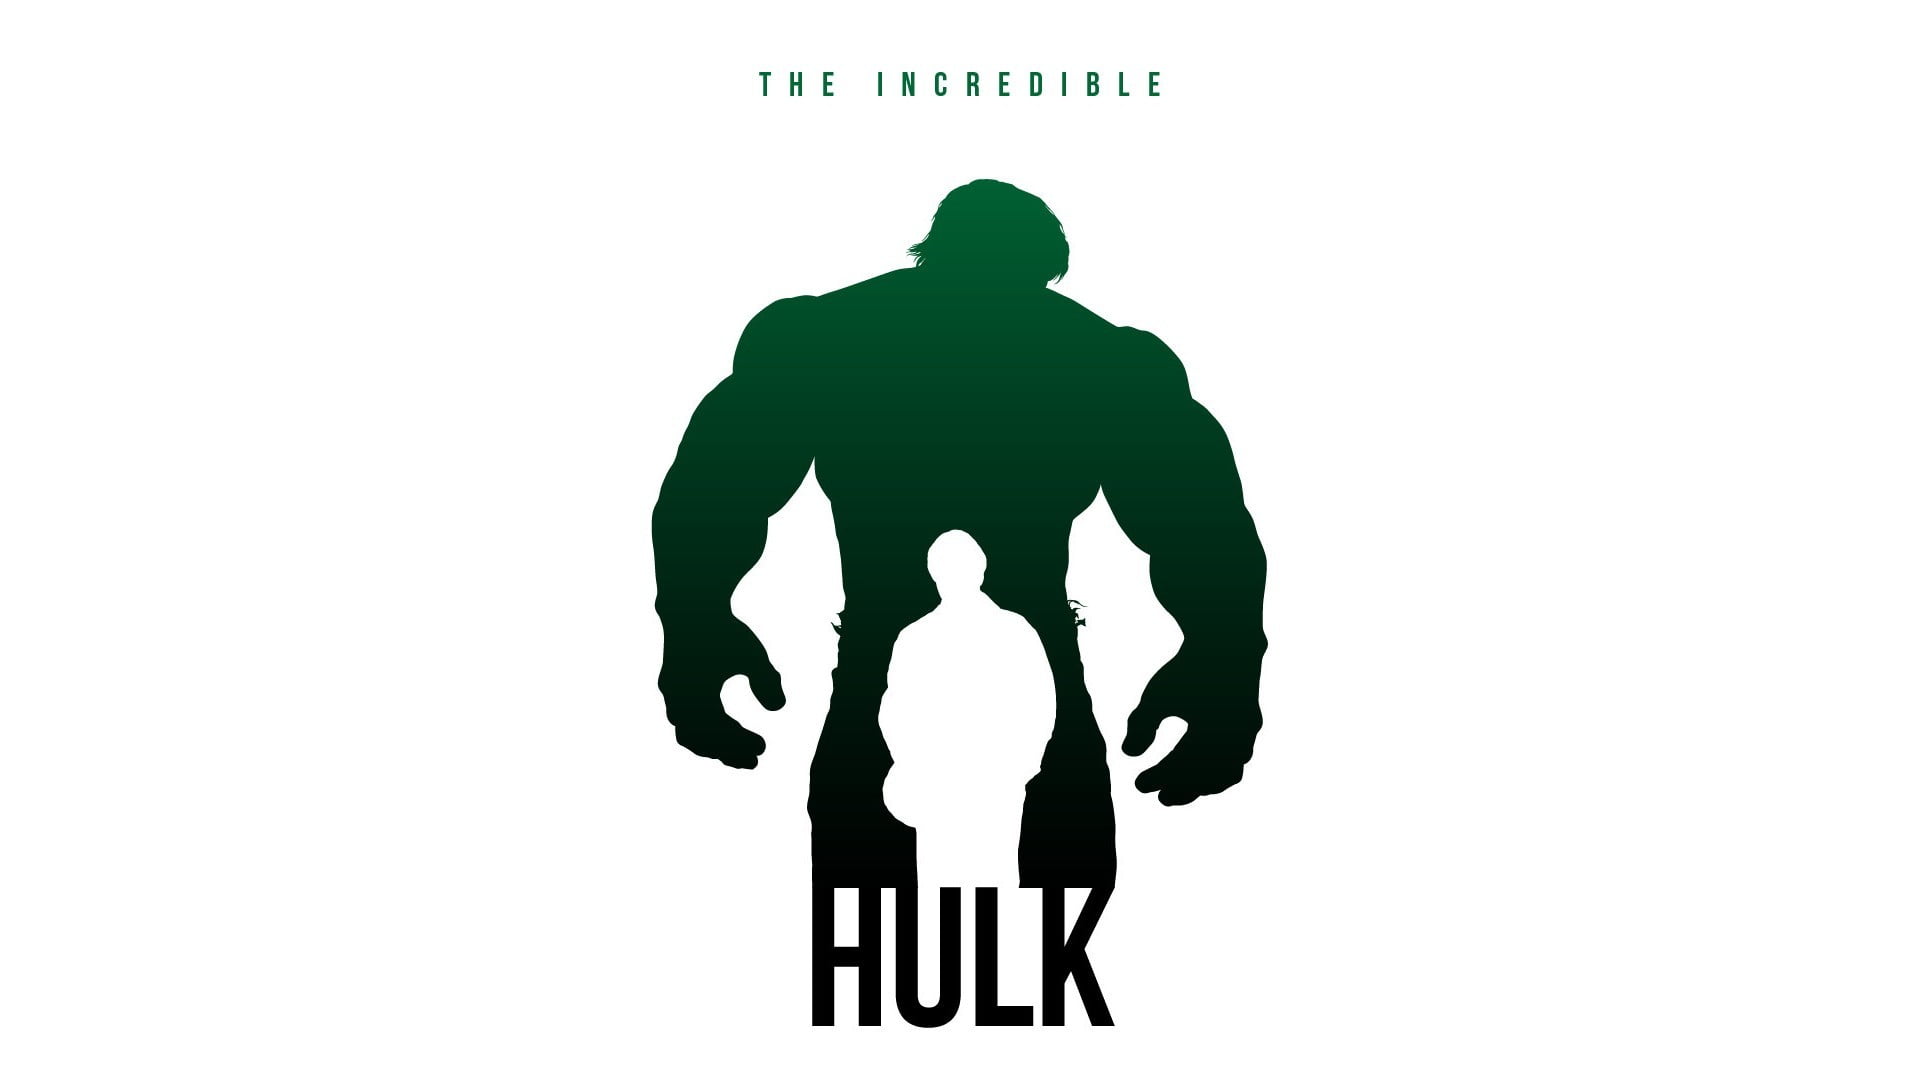 The Incredible Hulk illustration, The Avengers, minimalism, one person